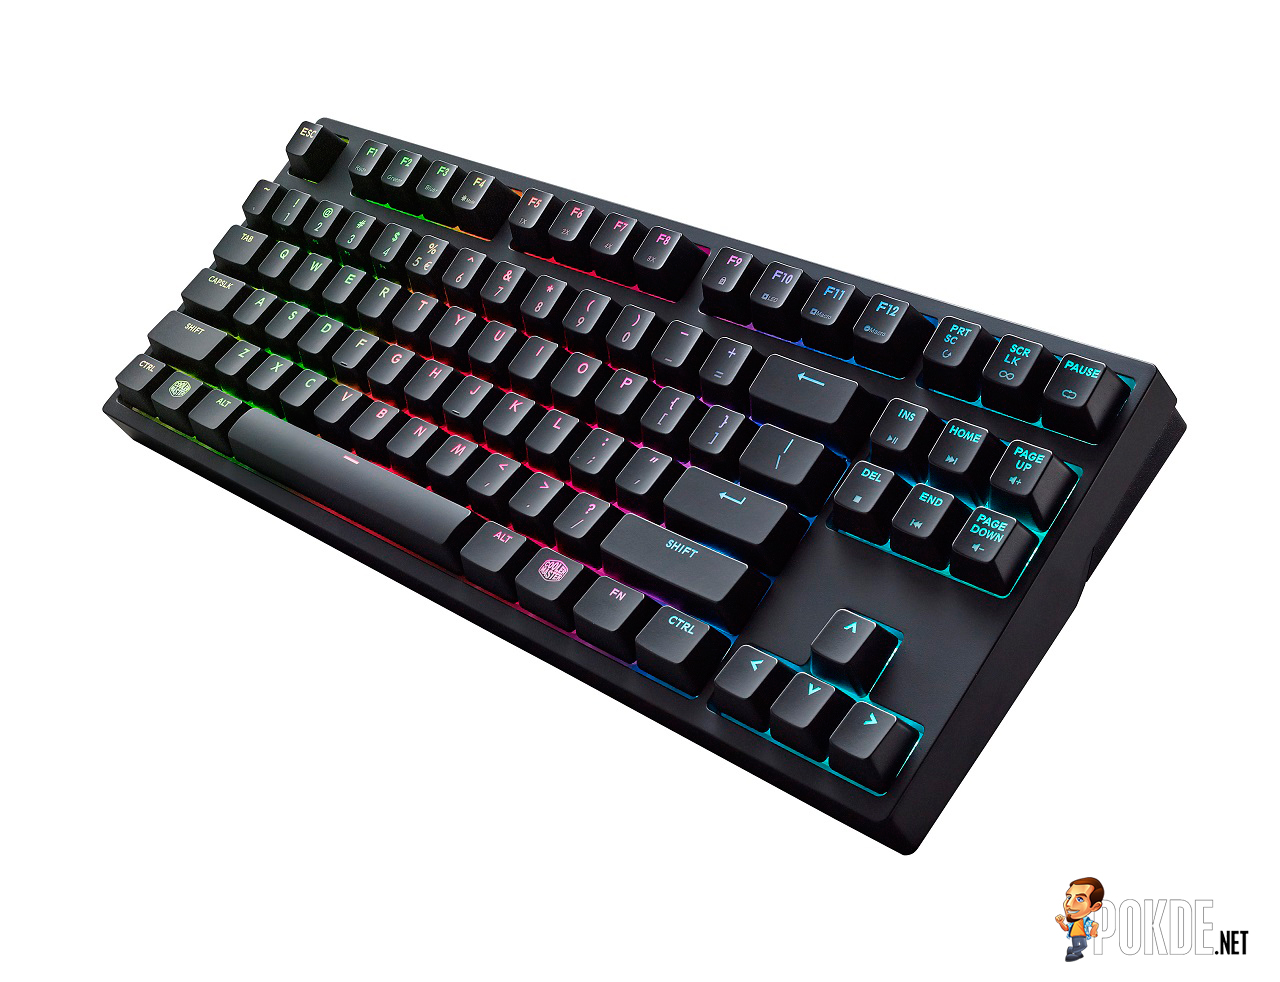 Cooler Master Announces RGB Keyboards 31